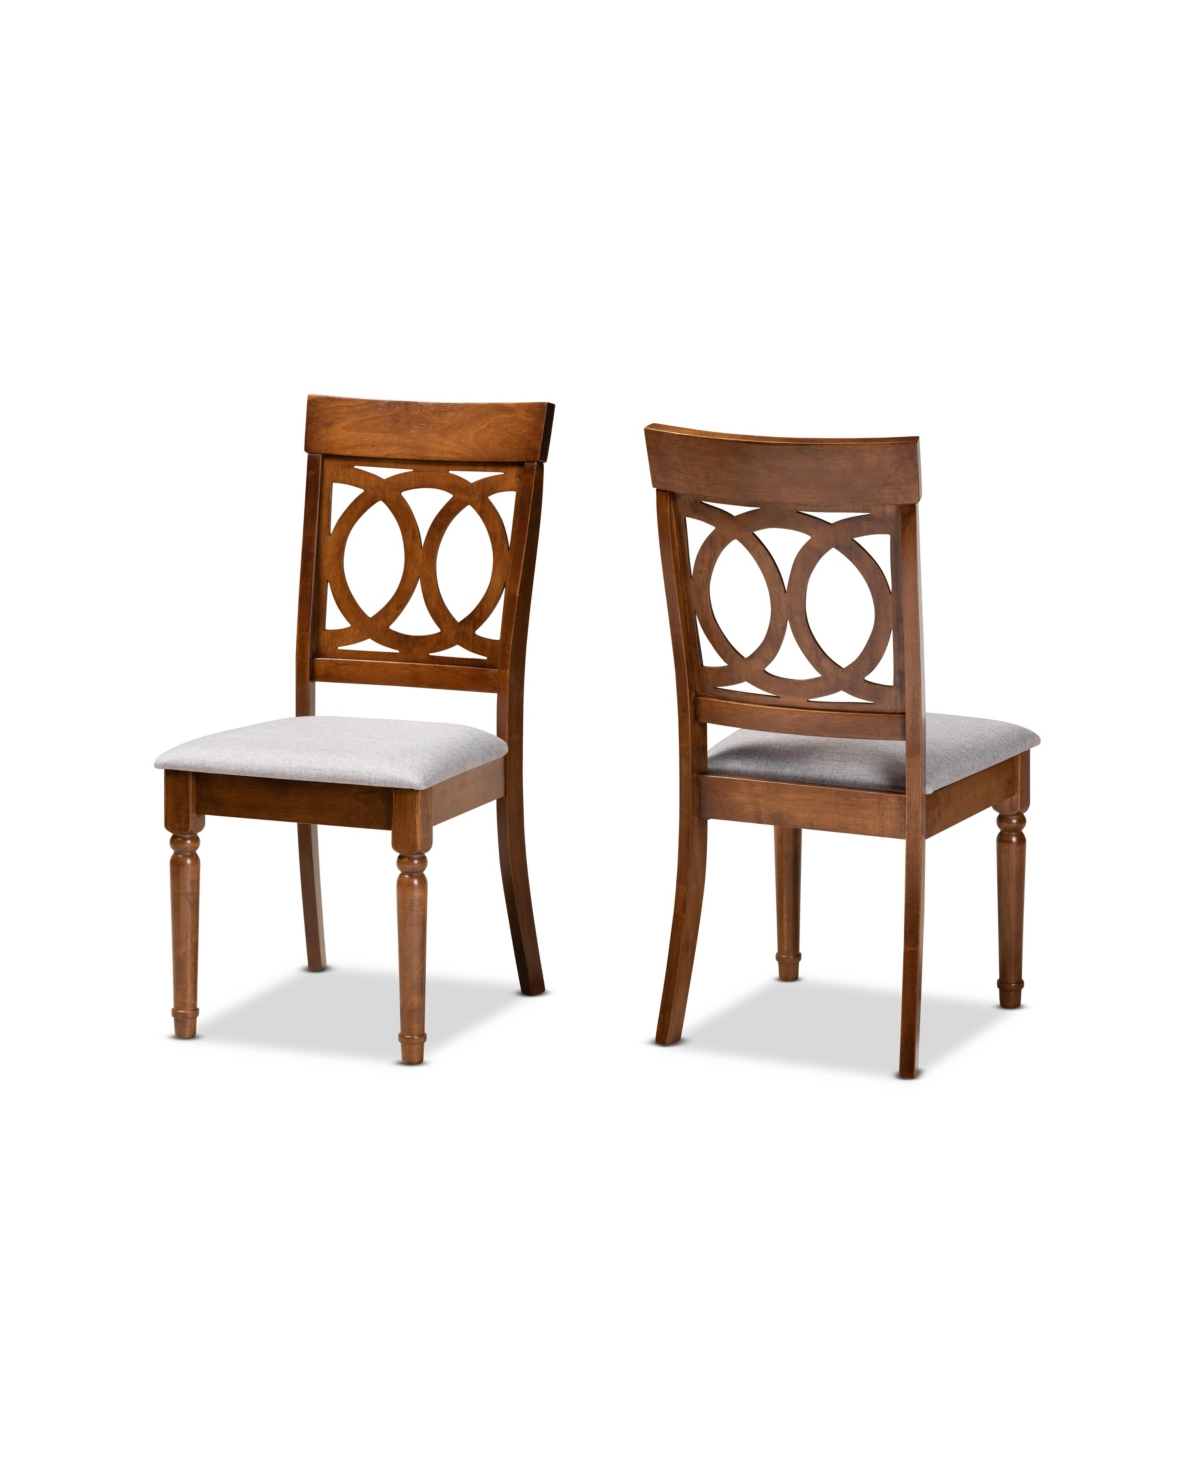 Baxton Studio Lucie Modern And Contemporary Wood Dining Chair Set, 2 Piece In Gray,walnut Brown